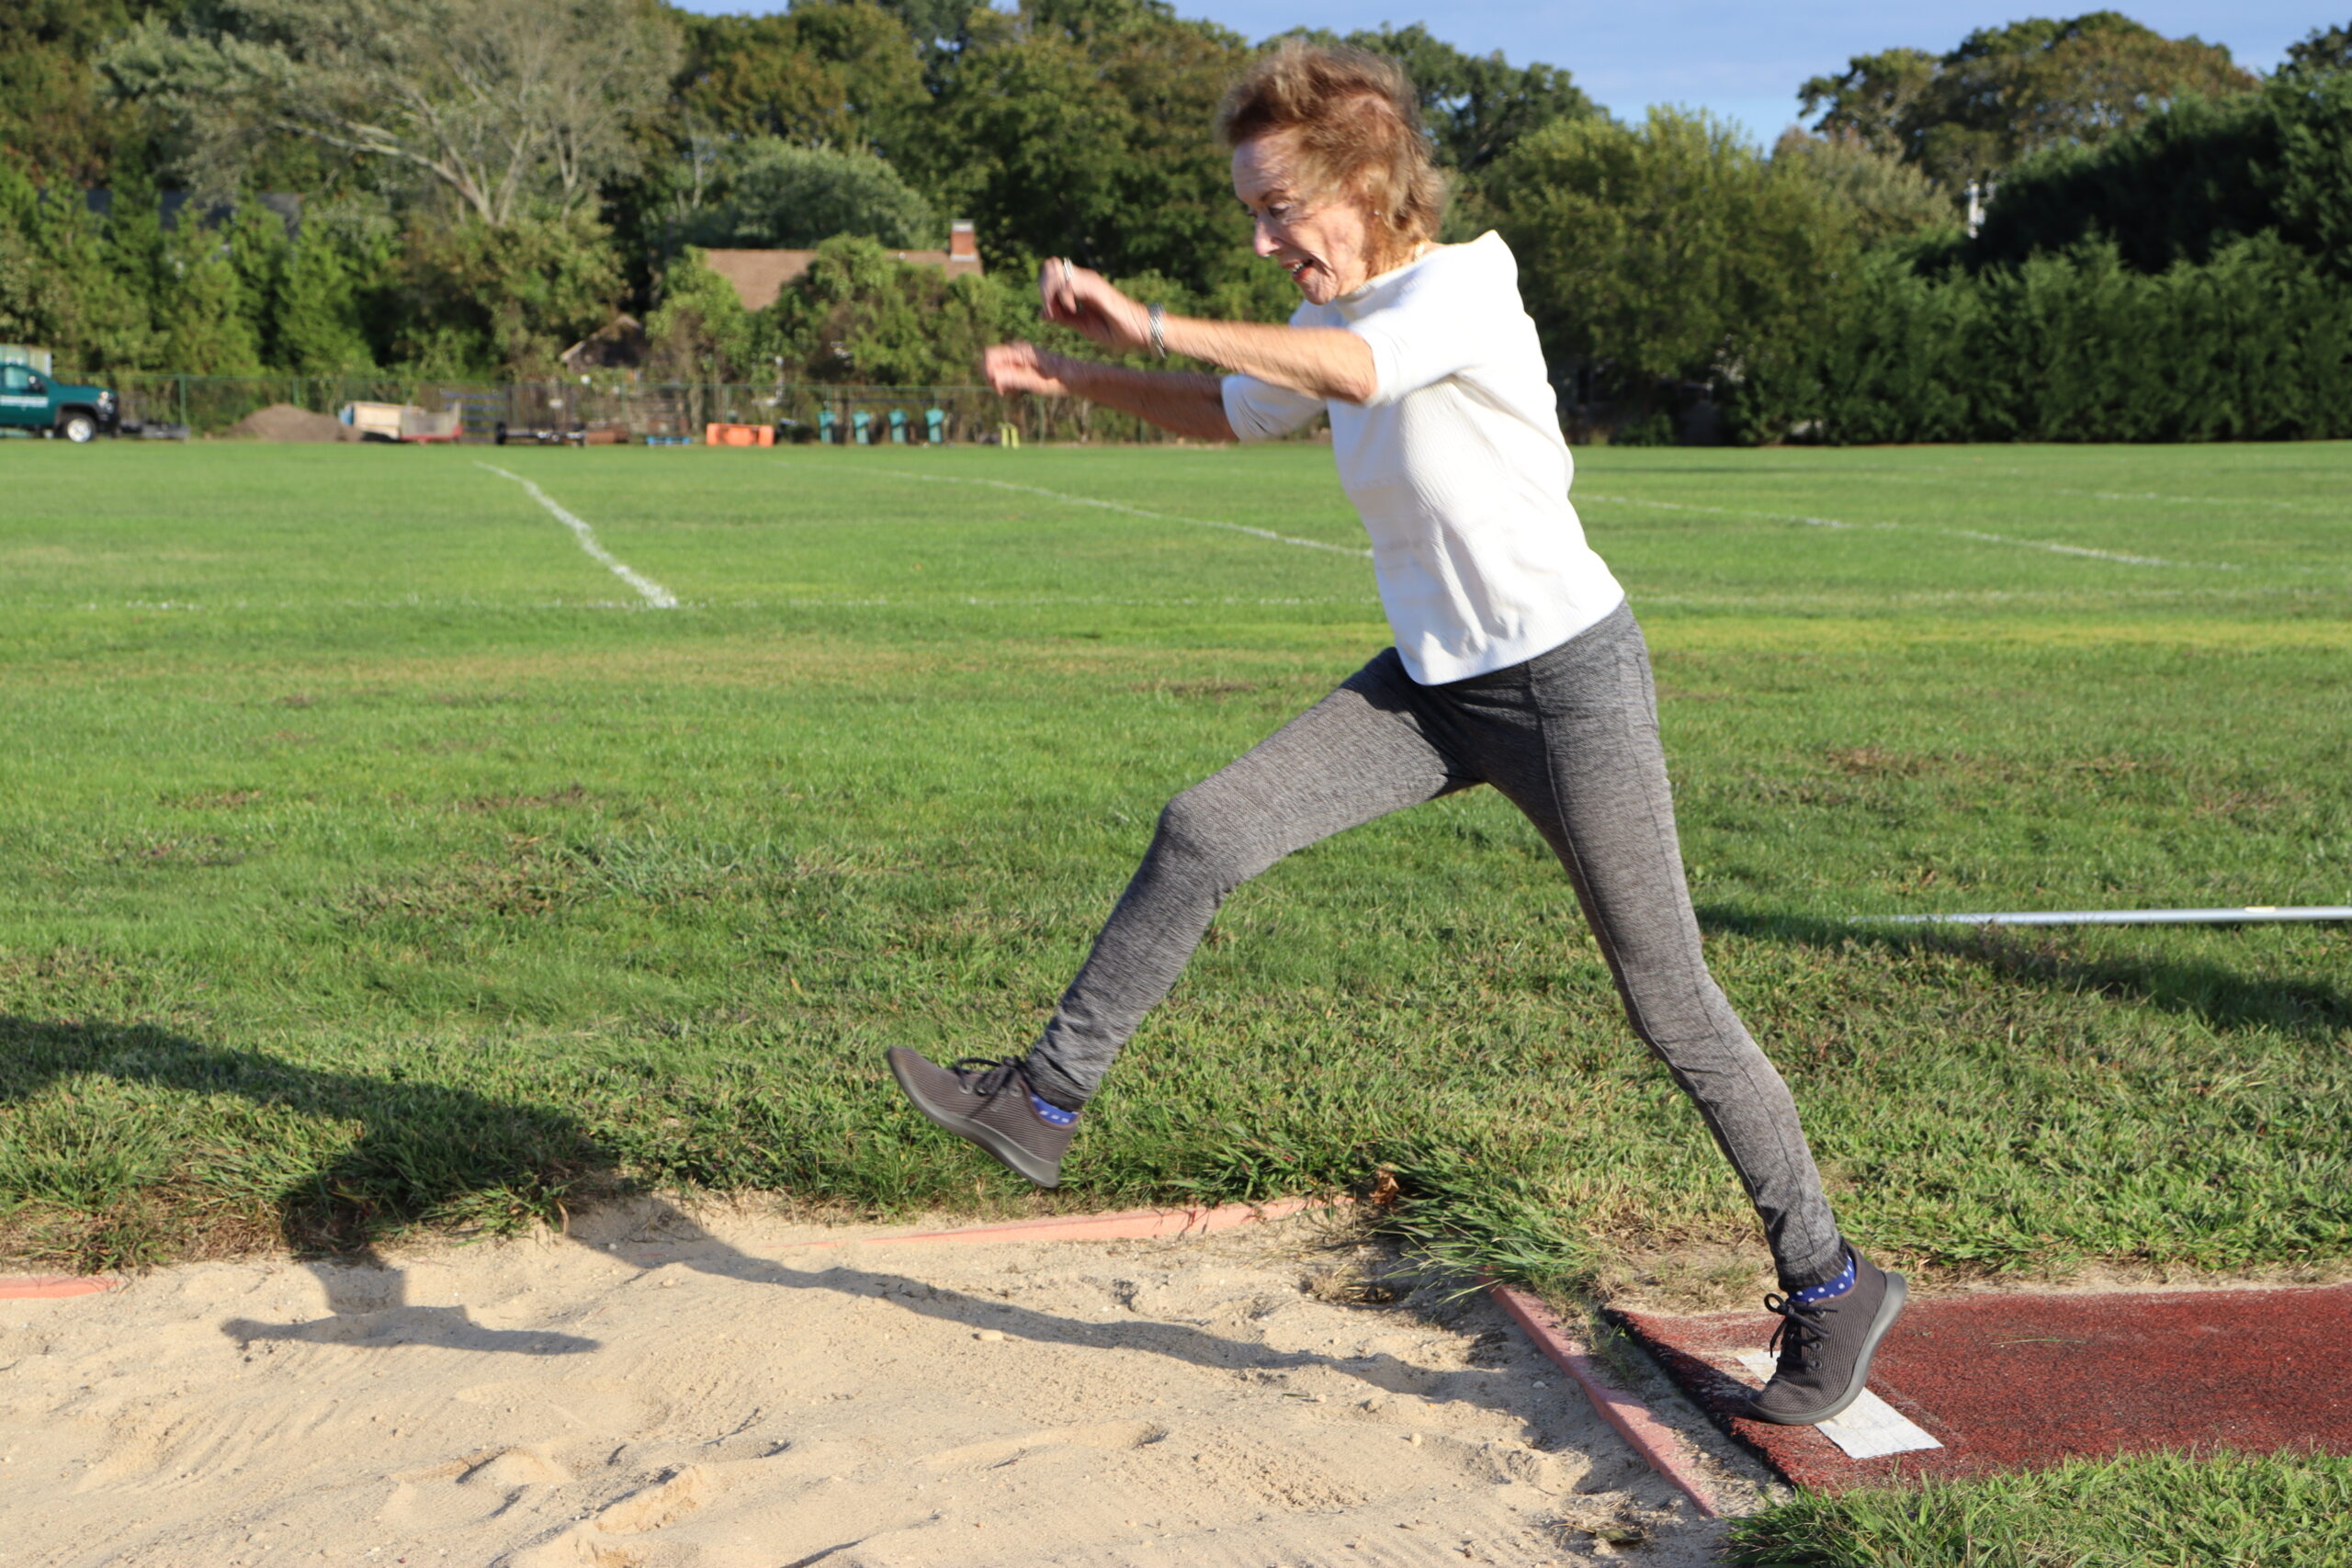 Quogue resident Hala Lawrence, 92, competed in the triple jump and long jump at a track and field event in New Jersey recently, posting distances that could potentially make her a world champion in the 90+ age group. CAILIN RILEY